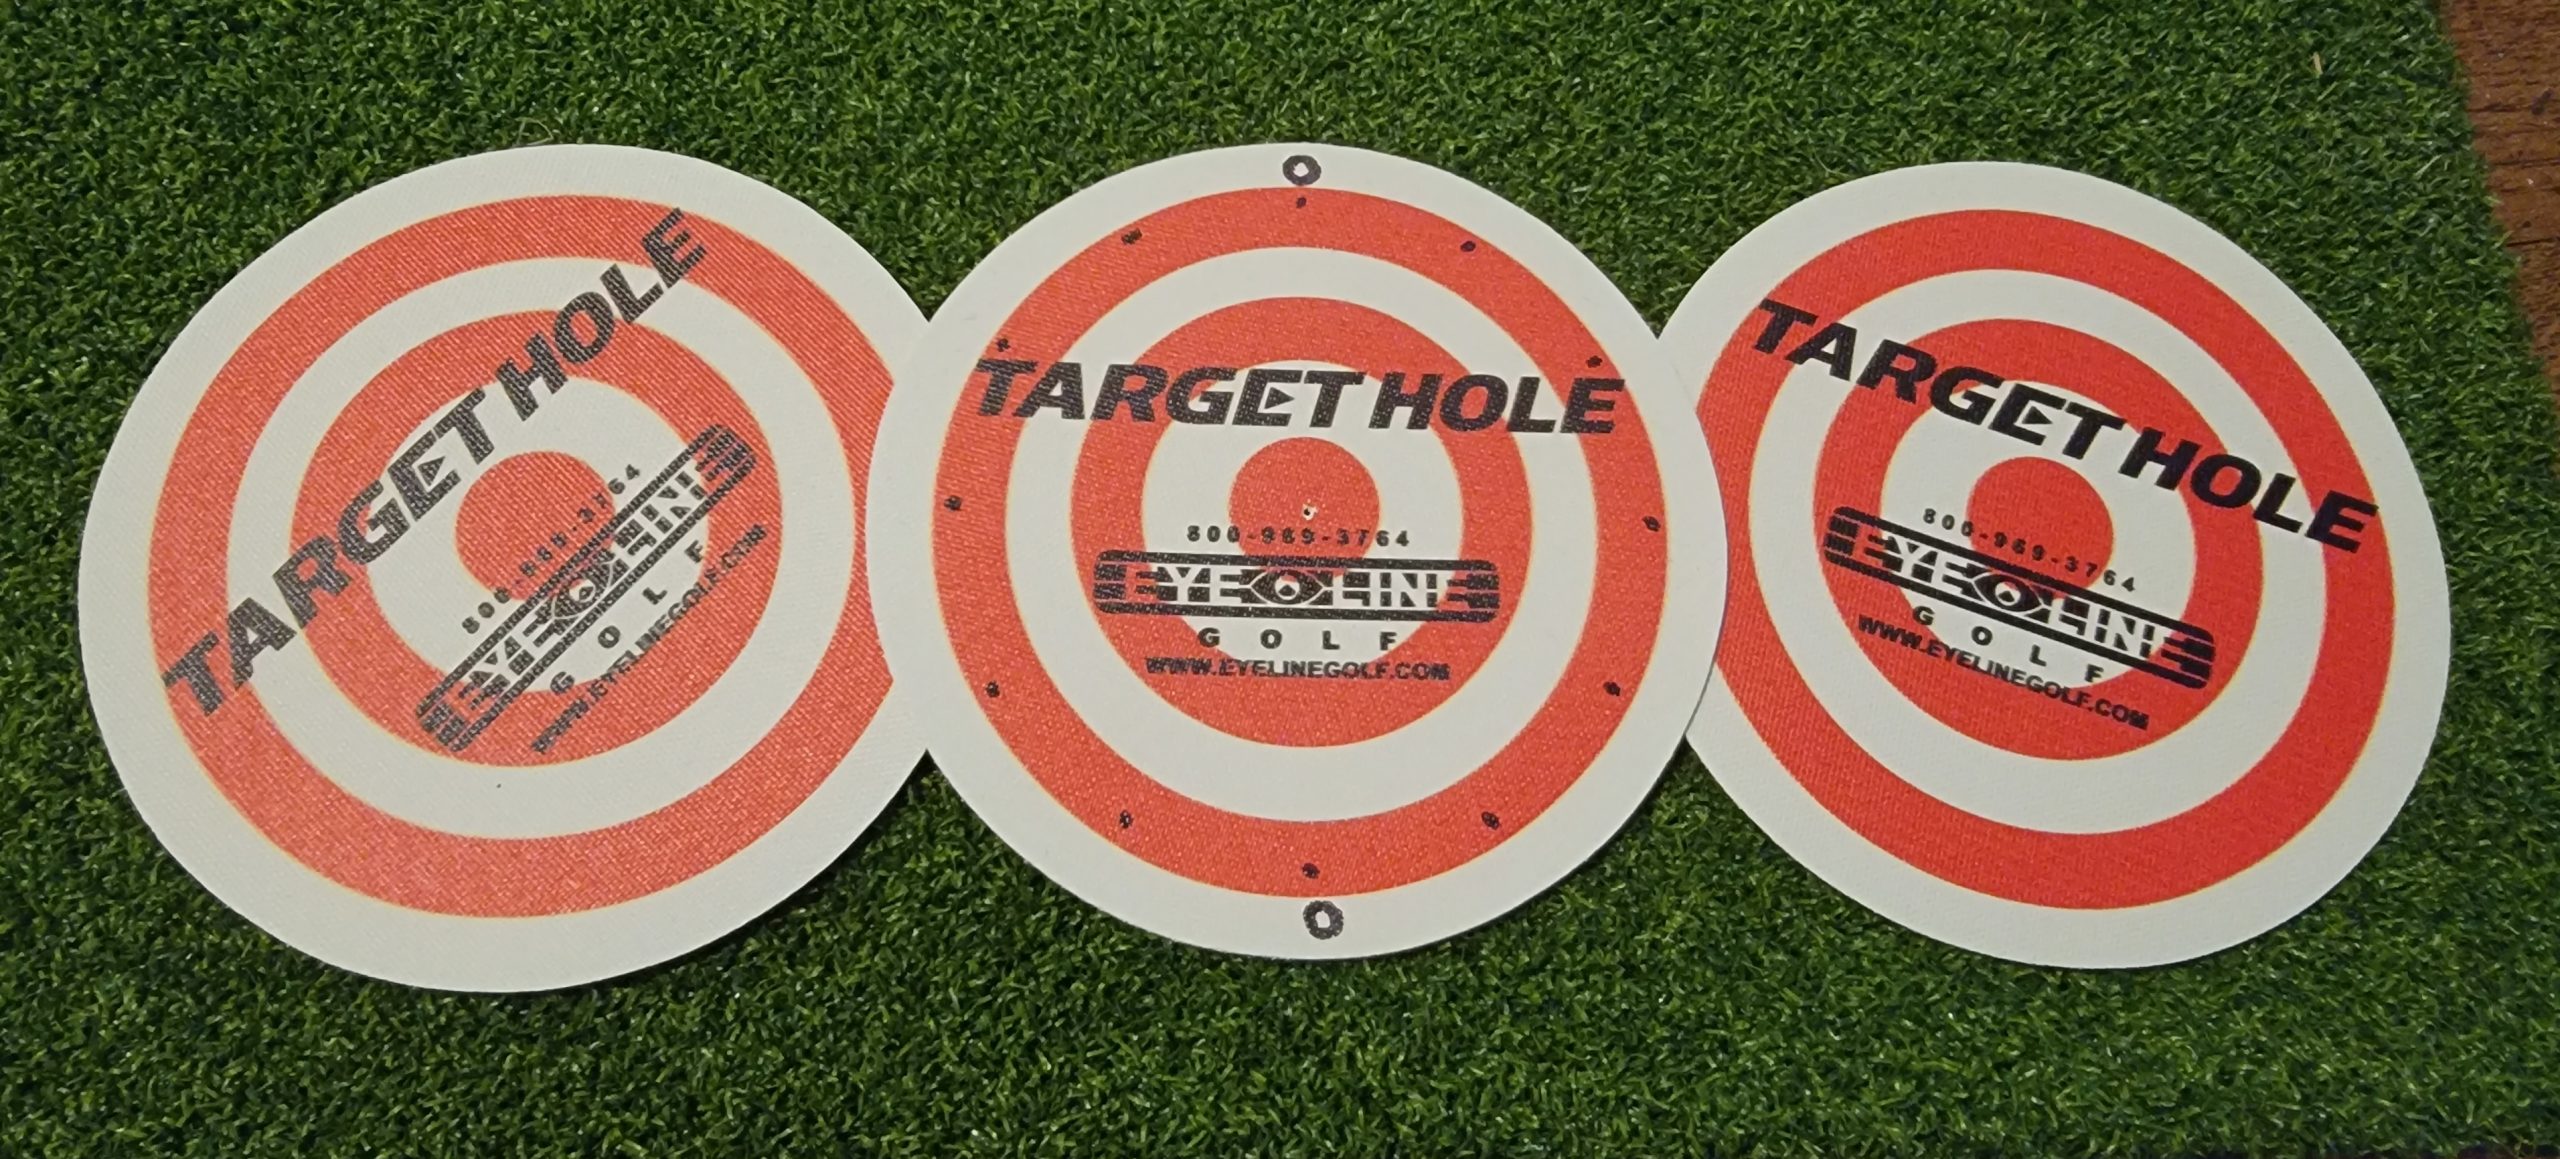 Old Duffer Golf image of target holes